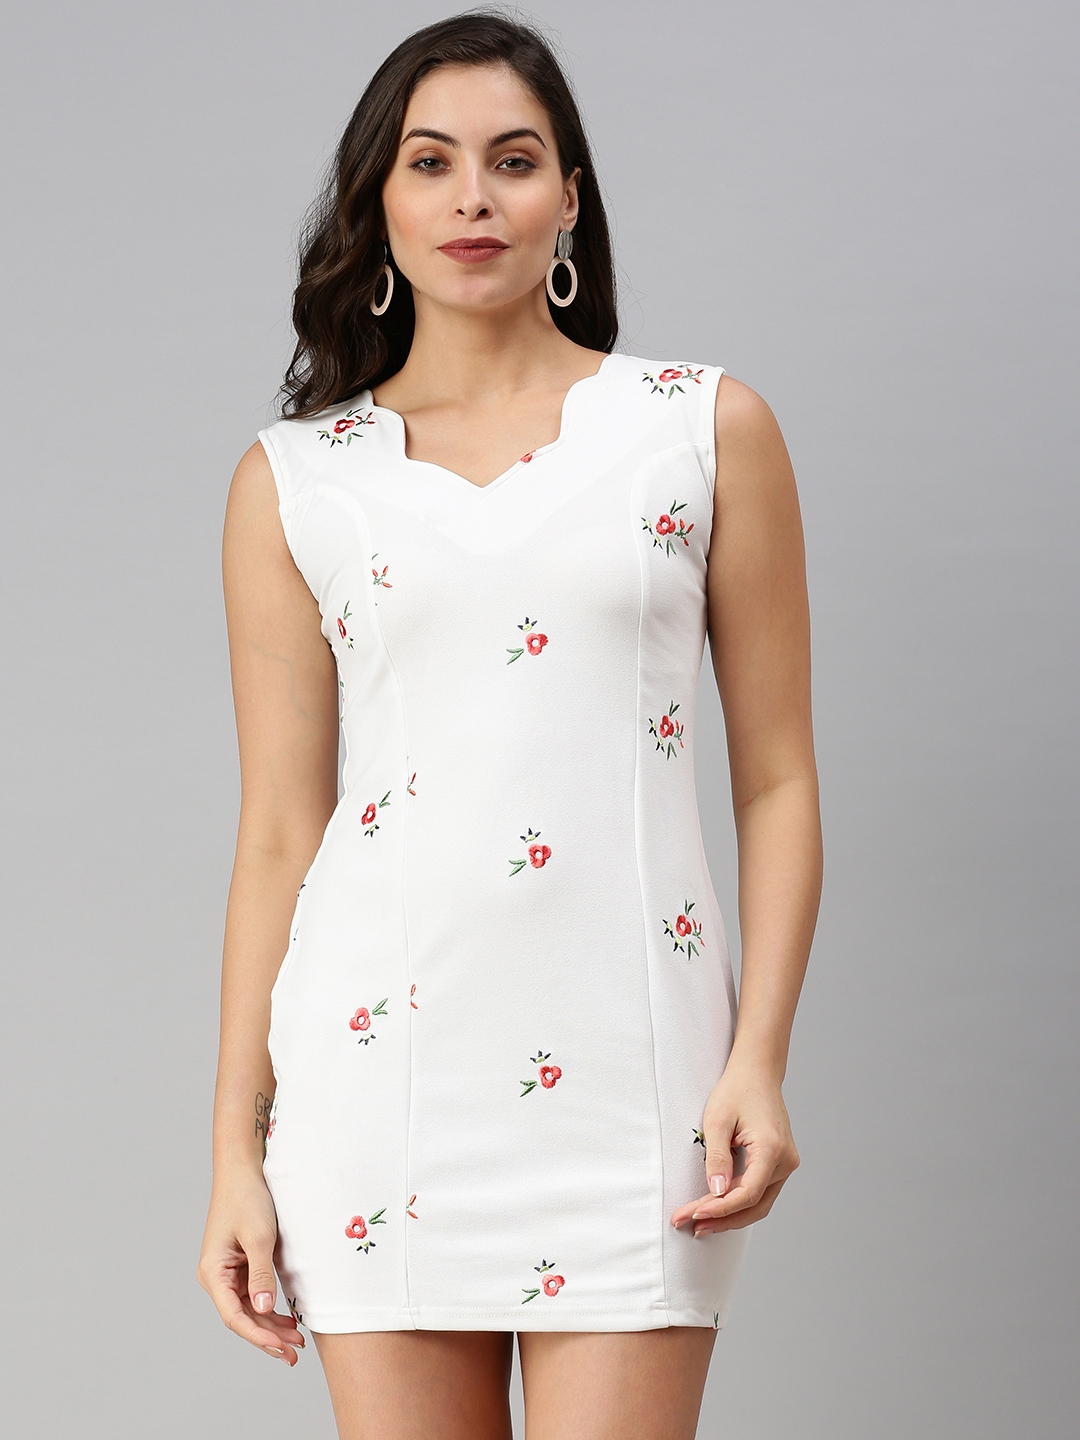 Women's White Polyester Solid Dresses